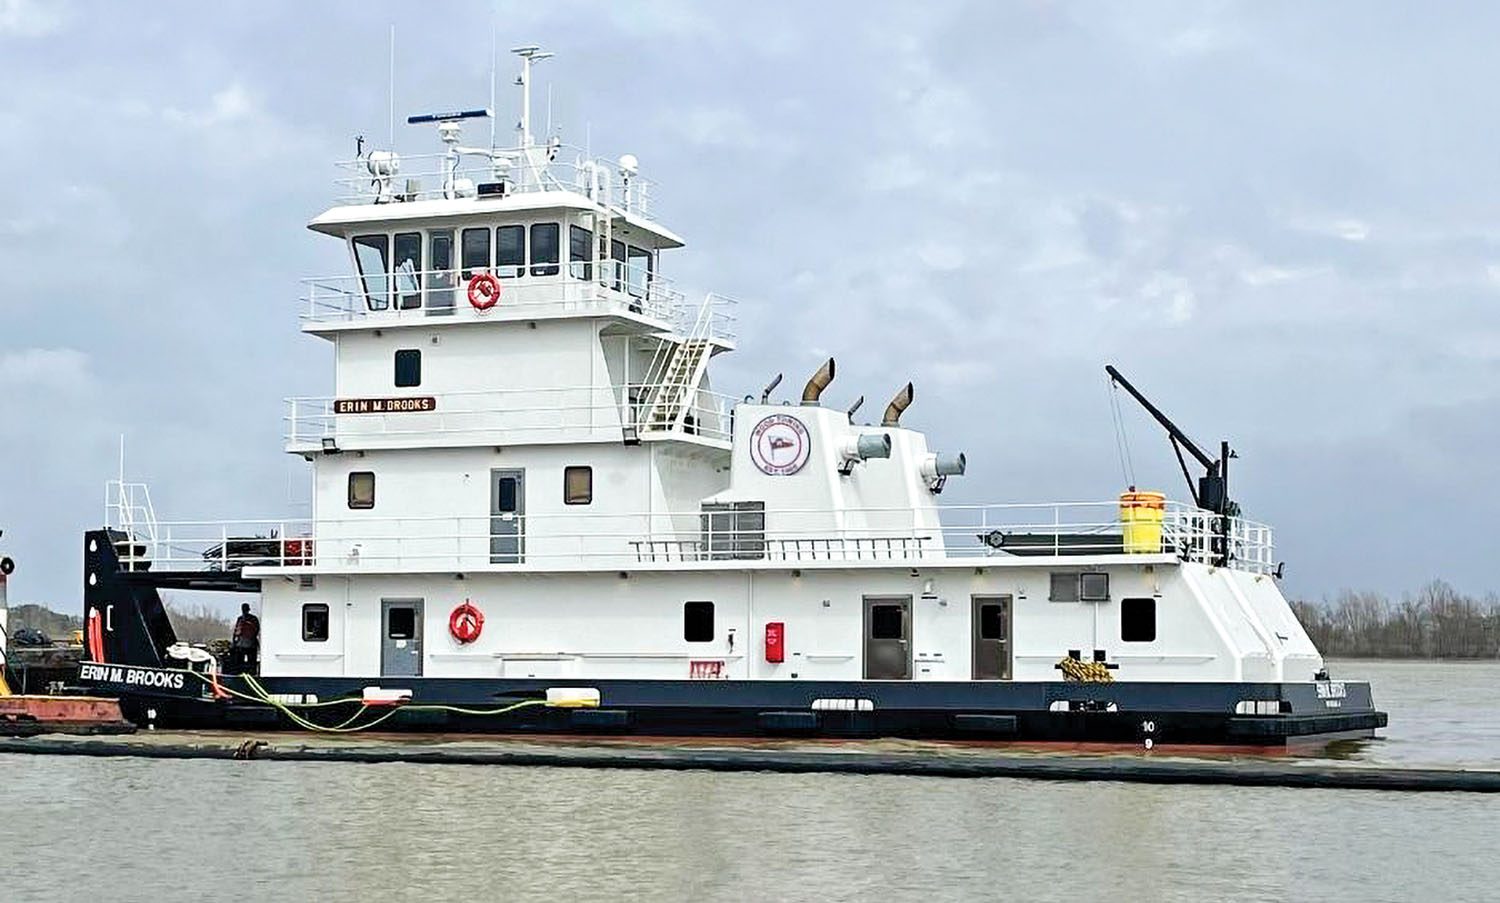 The Erin M. Brooks is the fifth of 15 towboats that C&C Marine & Repair is building for Maritime Partners.